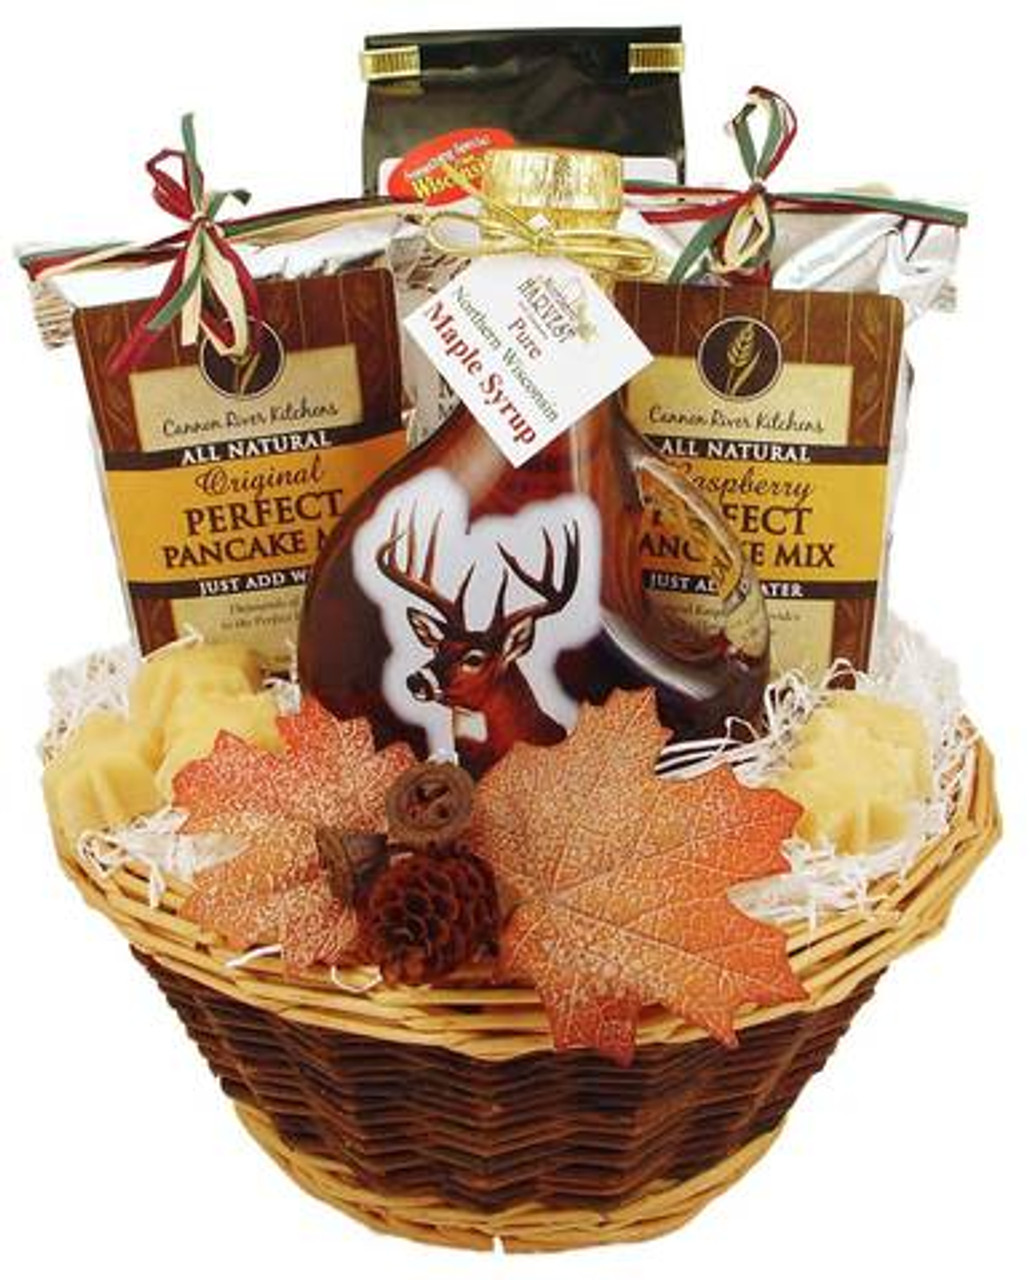 Grand Gourmet Gift Basket by